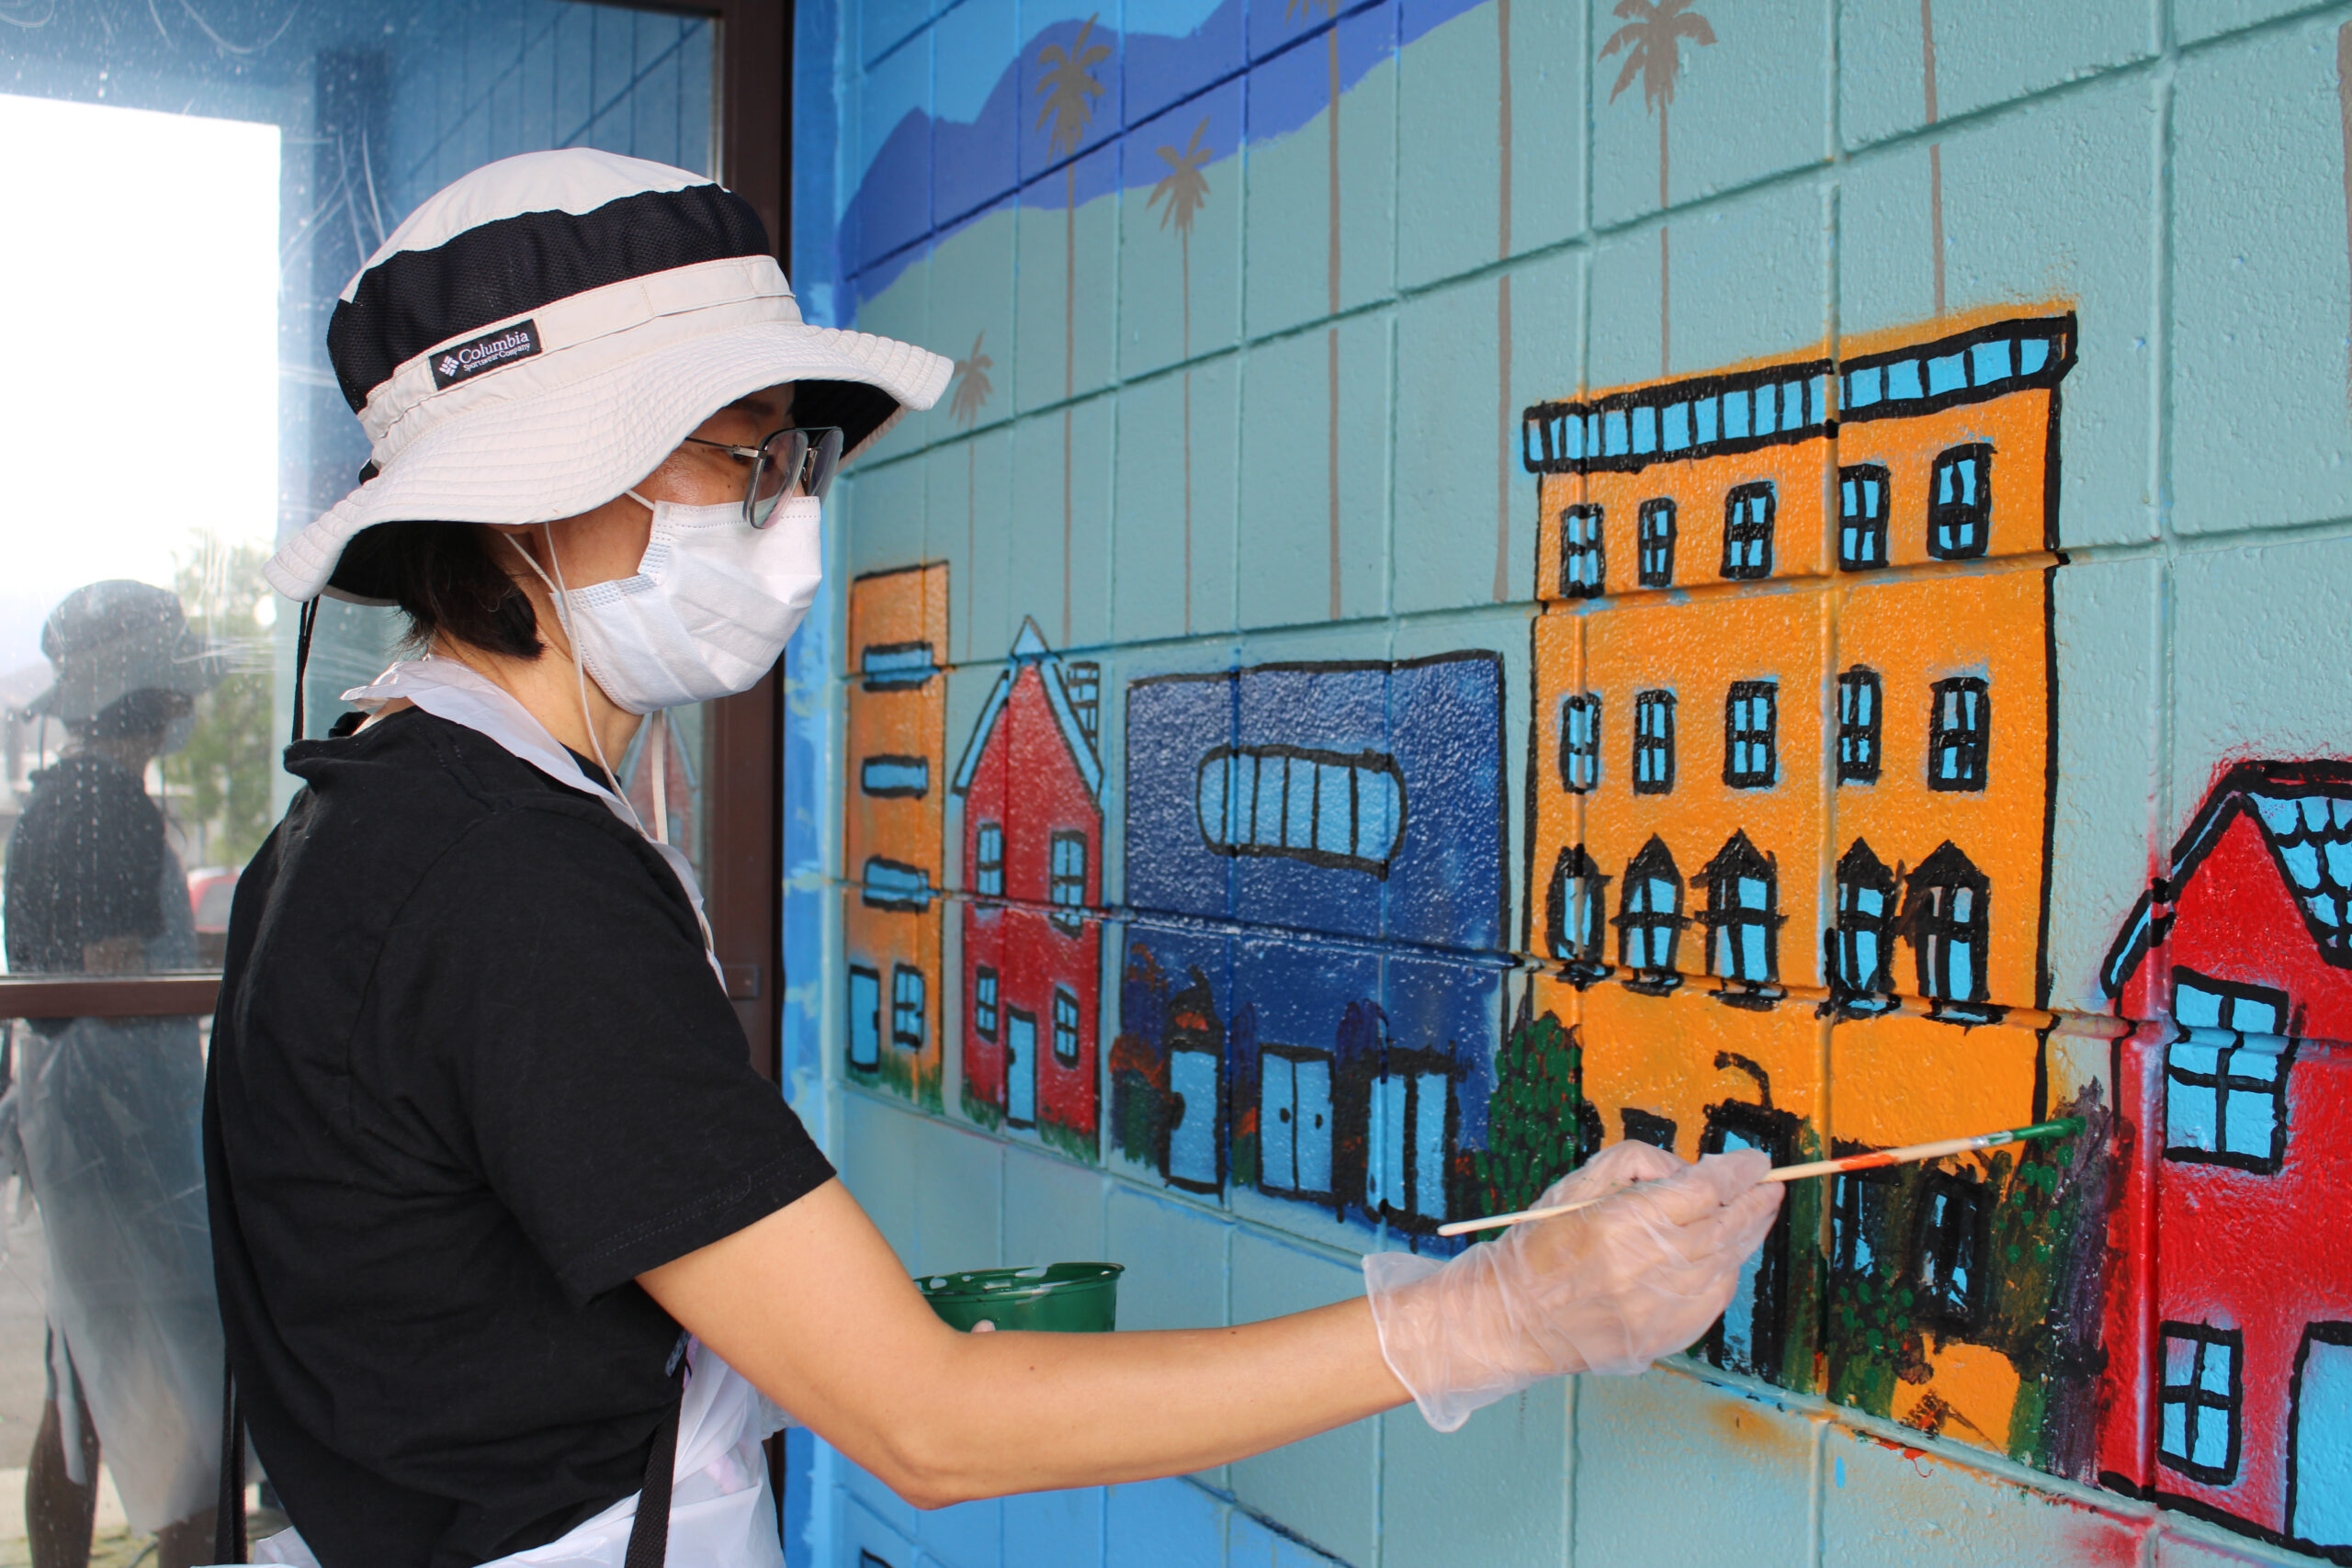 Woman paints the mural on the building